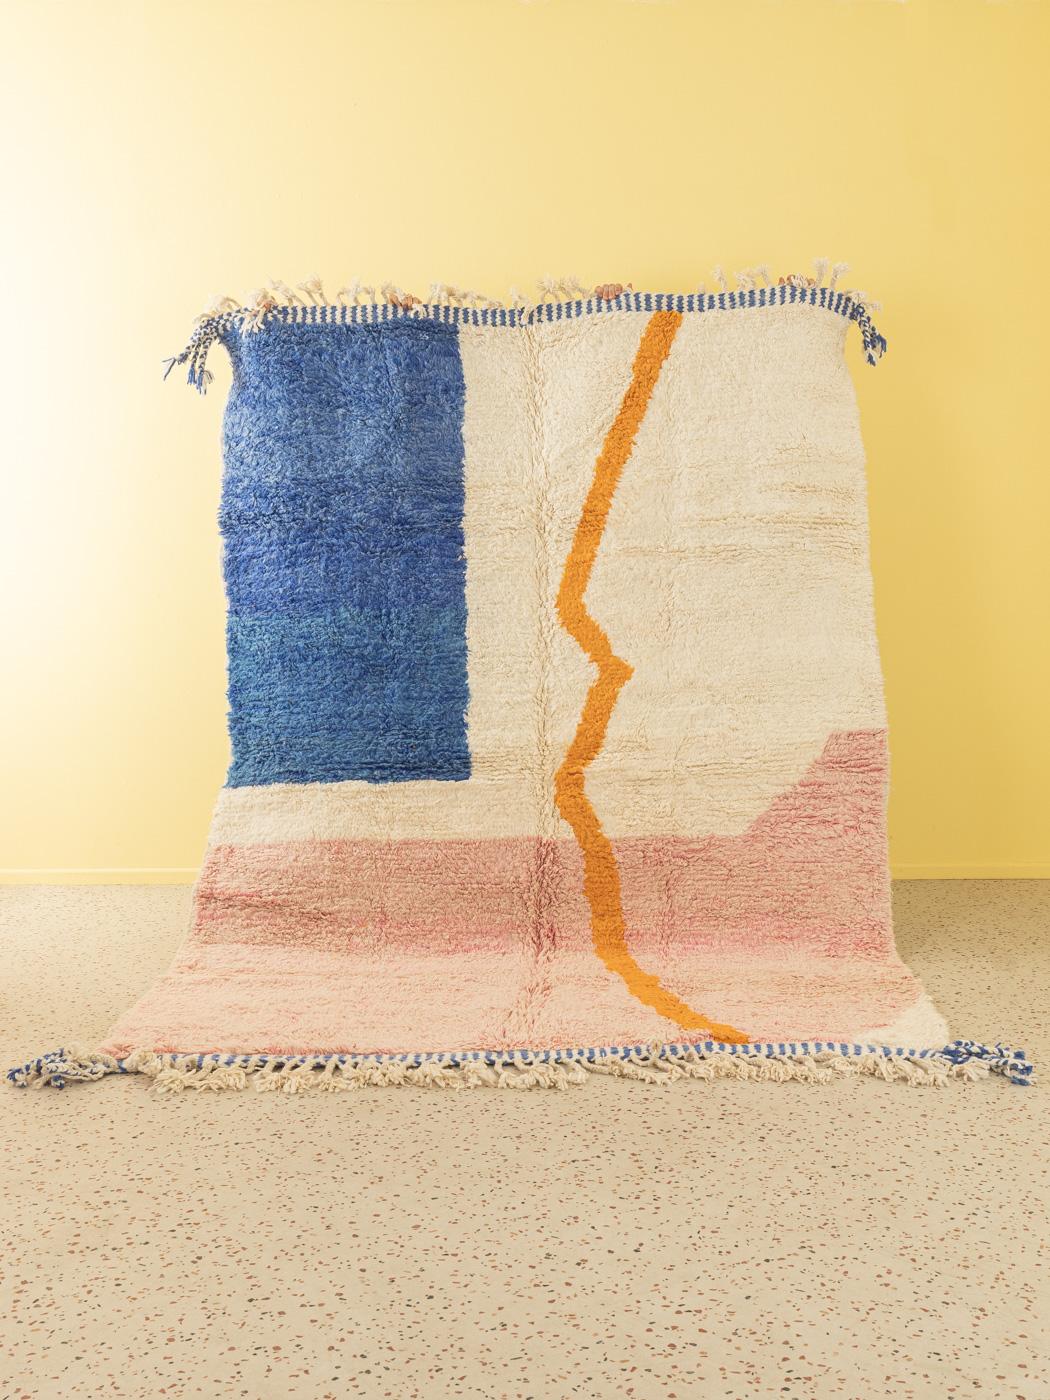 Beach is a contemporary 100% wool rug – thick and soft, comfortable underfoot. Our Berber rugs are handwoven and handknotted by Amazing women in the Atlas Mountains. These communities have been crafting rugs for thousands of years. One knot at a